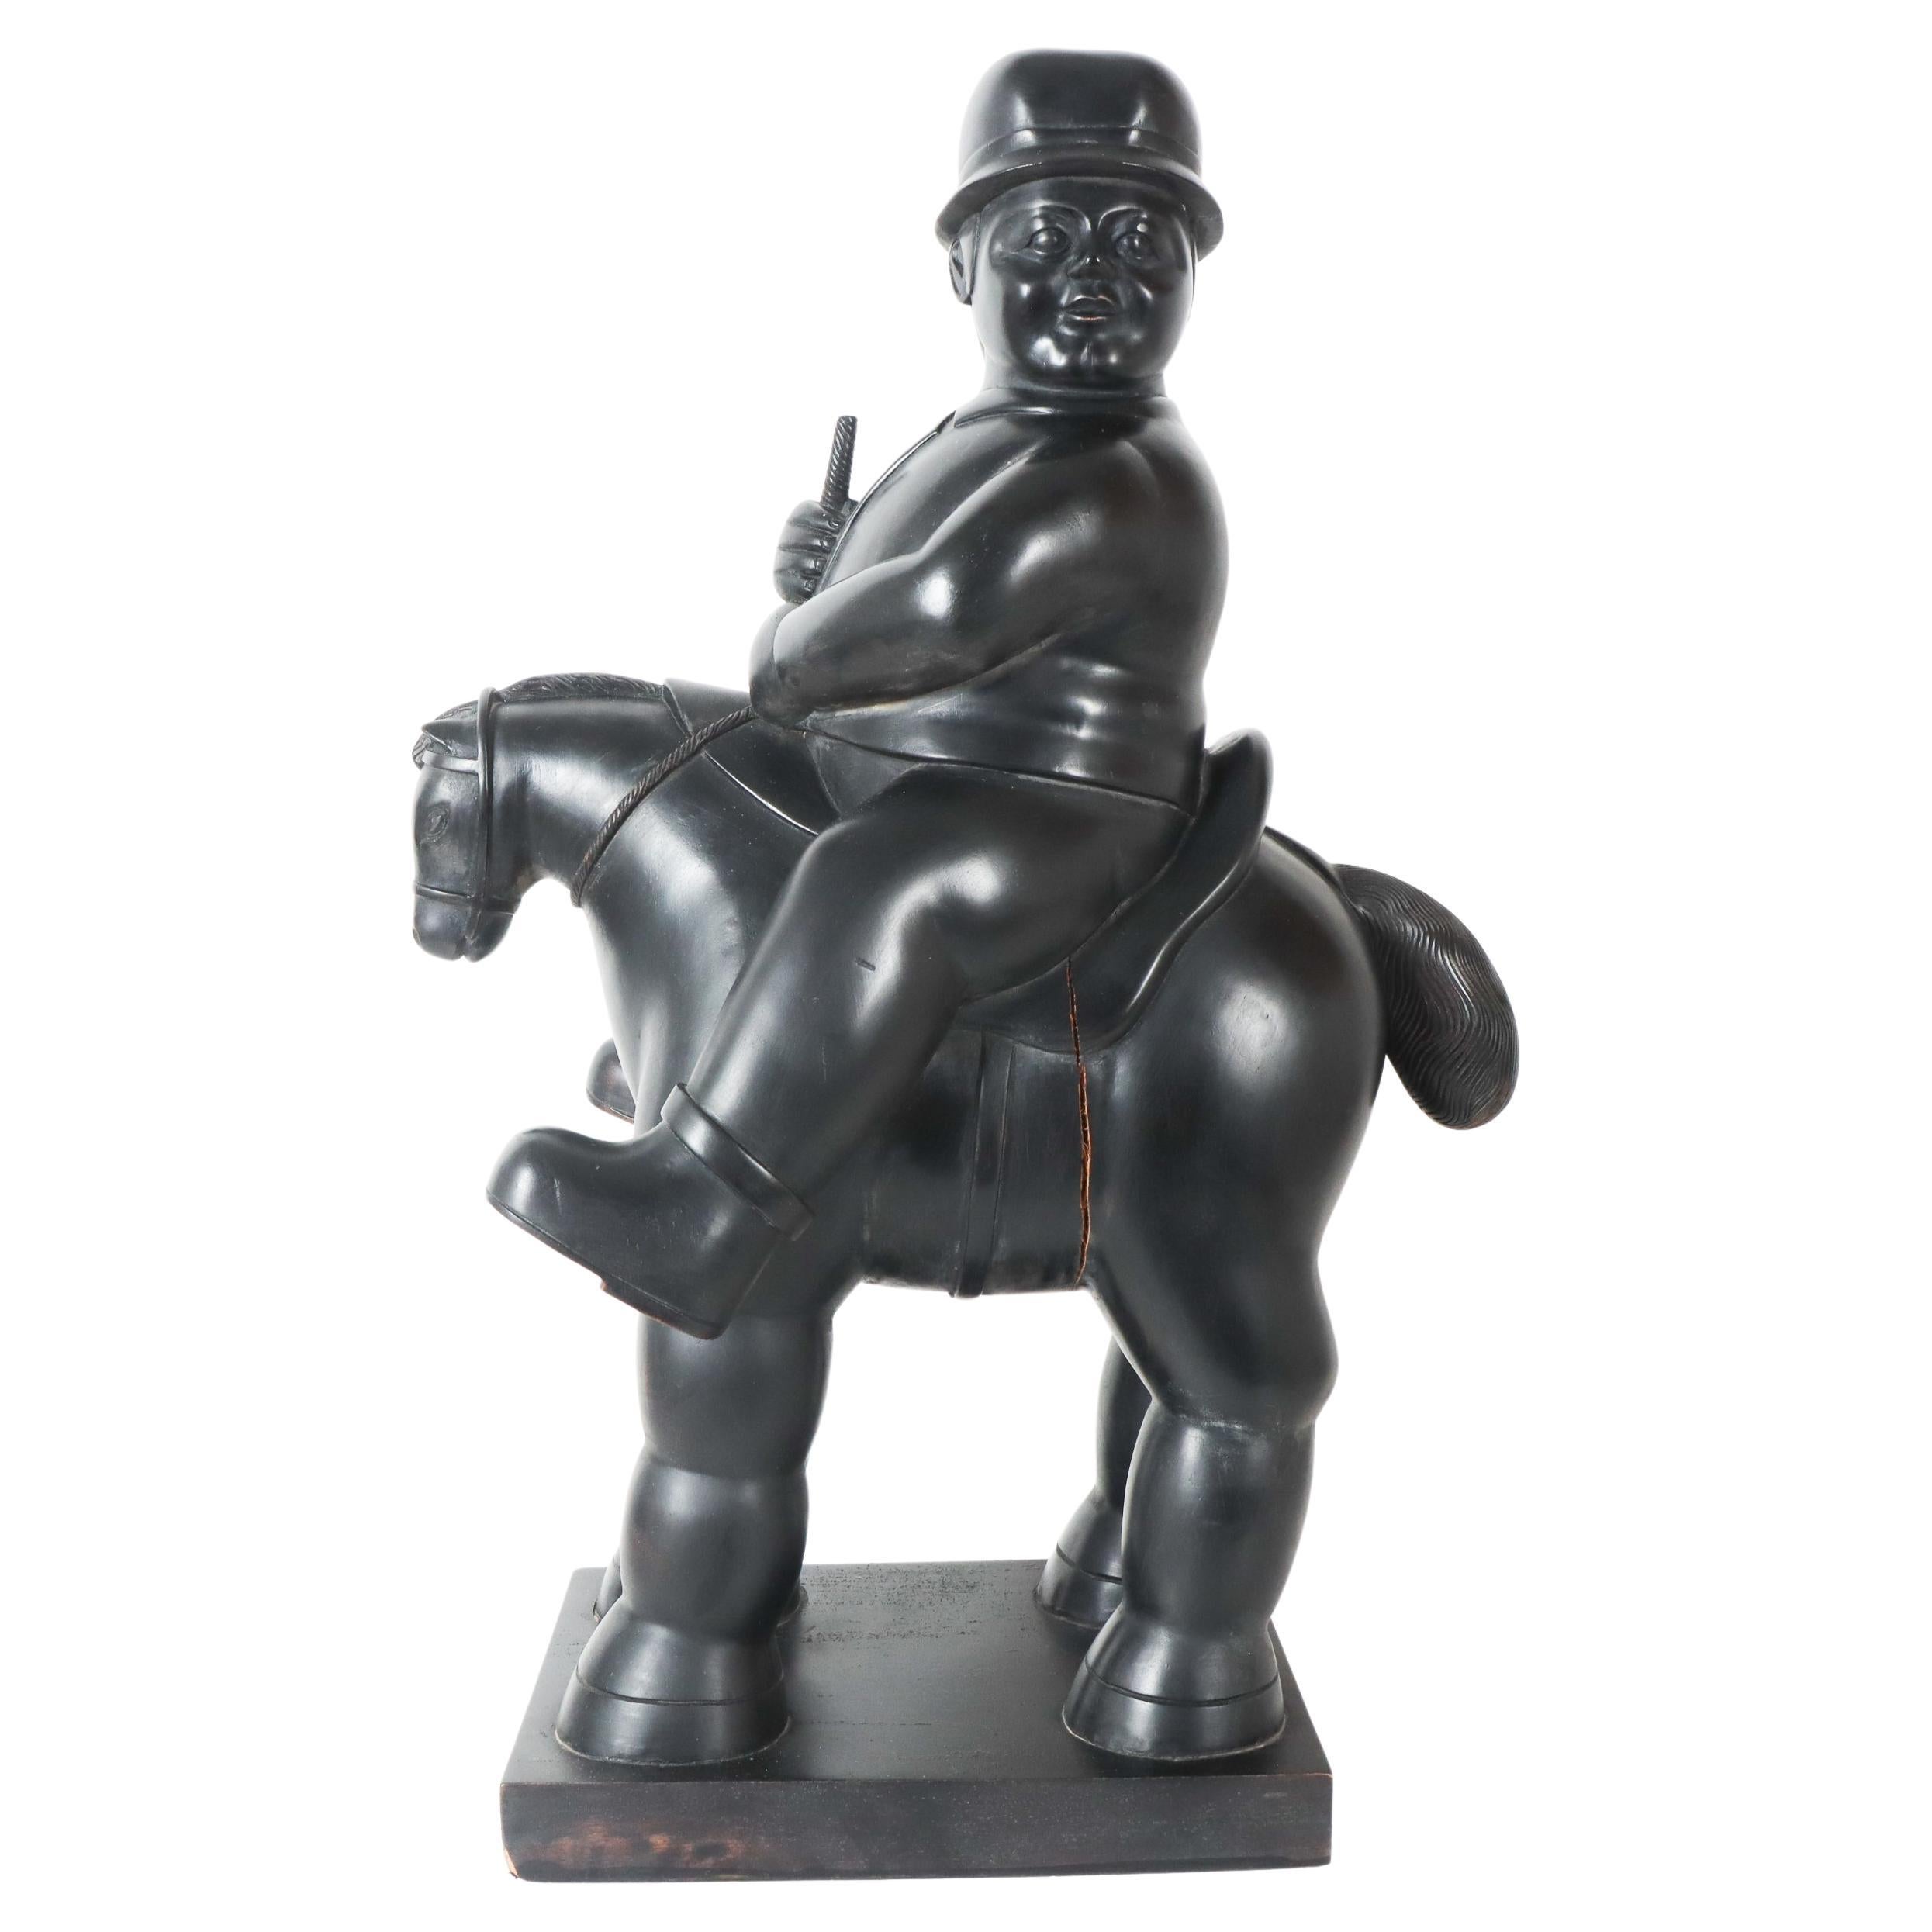 Fernando Botero "Man on Horse" Wood Sculpture For Sale